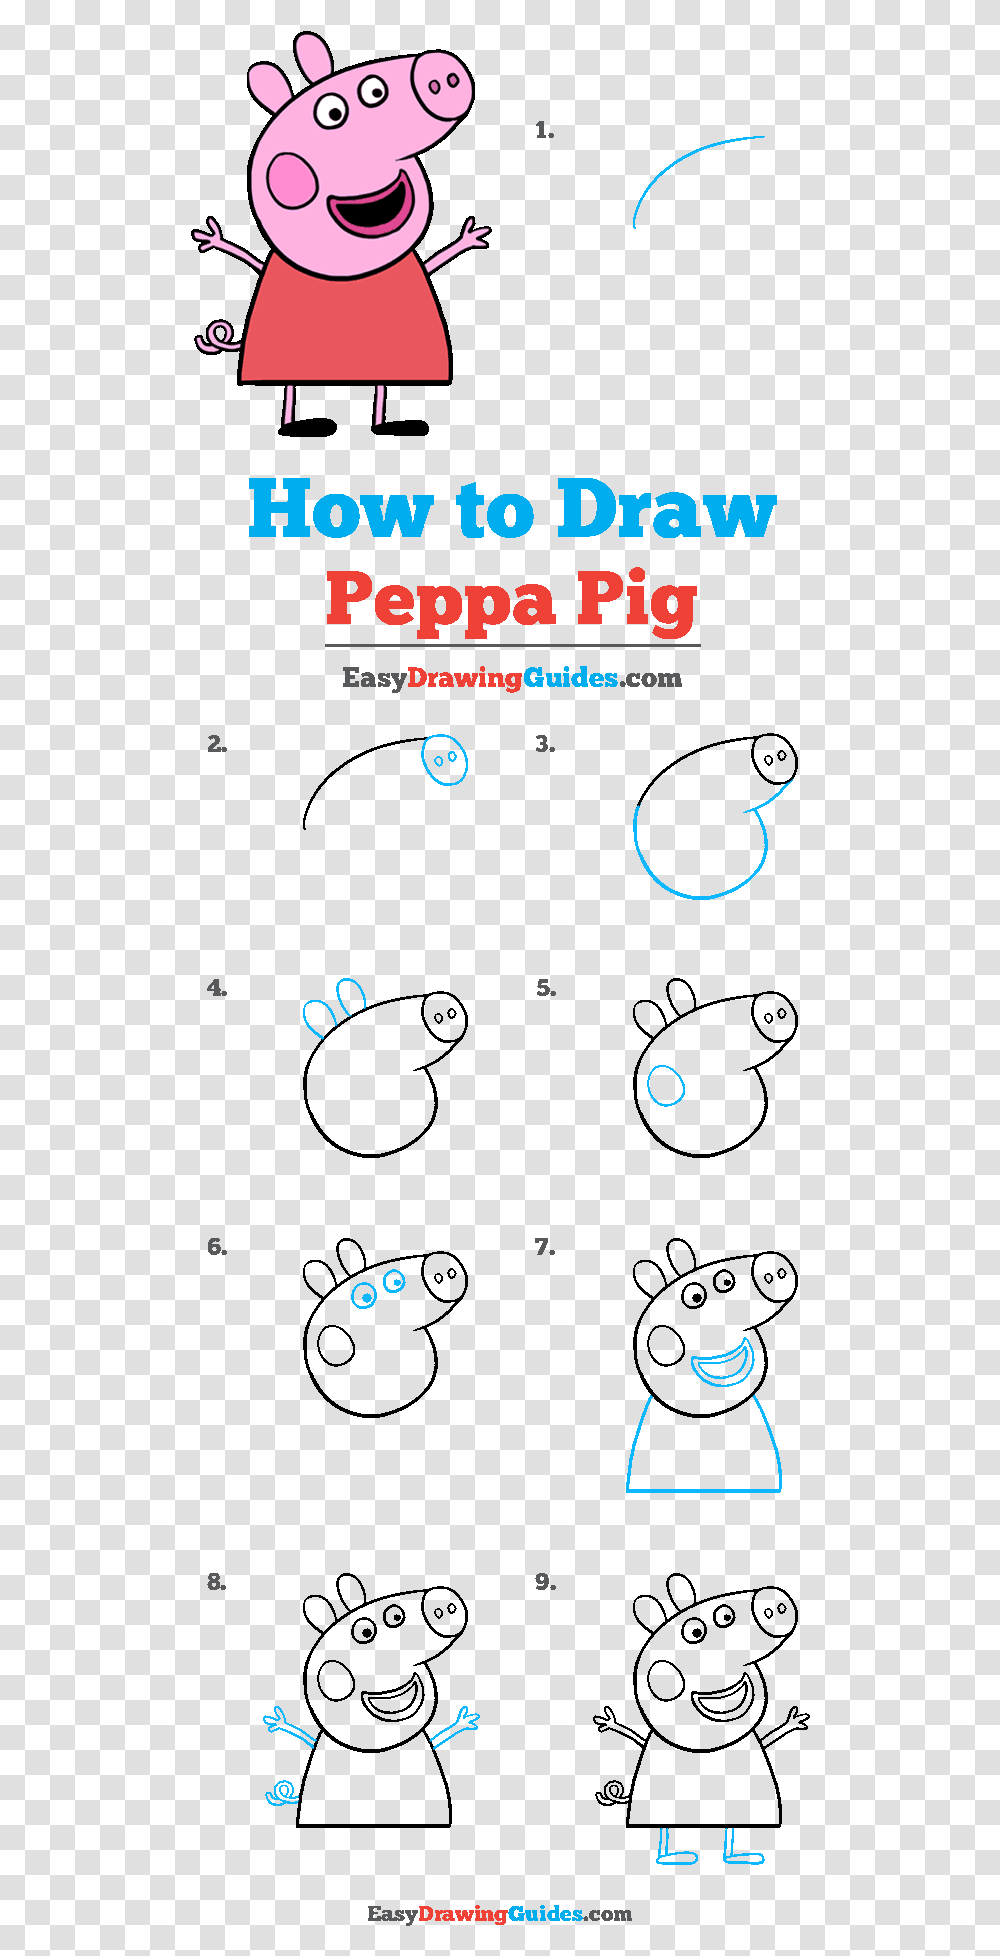 How To Draw Peppa Pig Peppa Pig Drawing Easy, Number, Poster Transparent Png